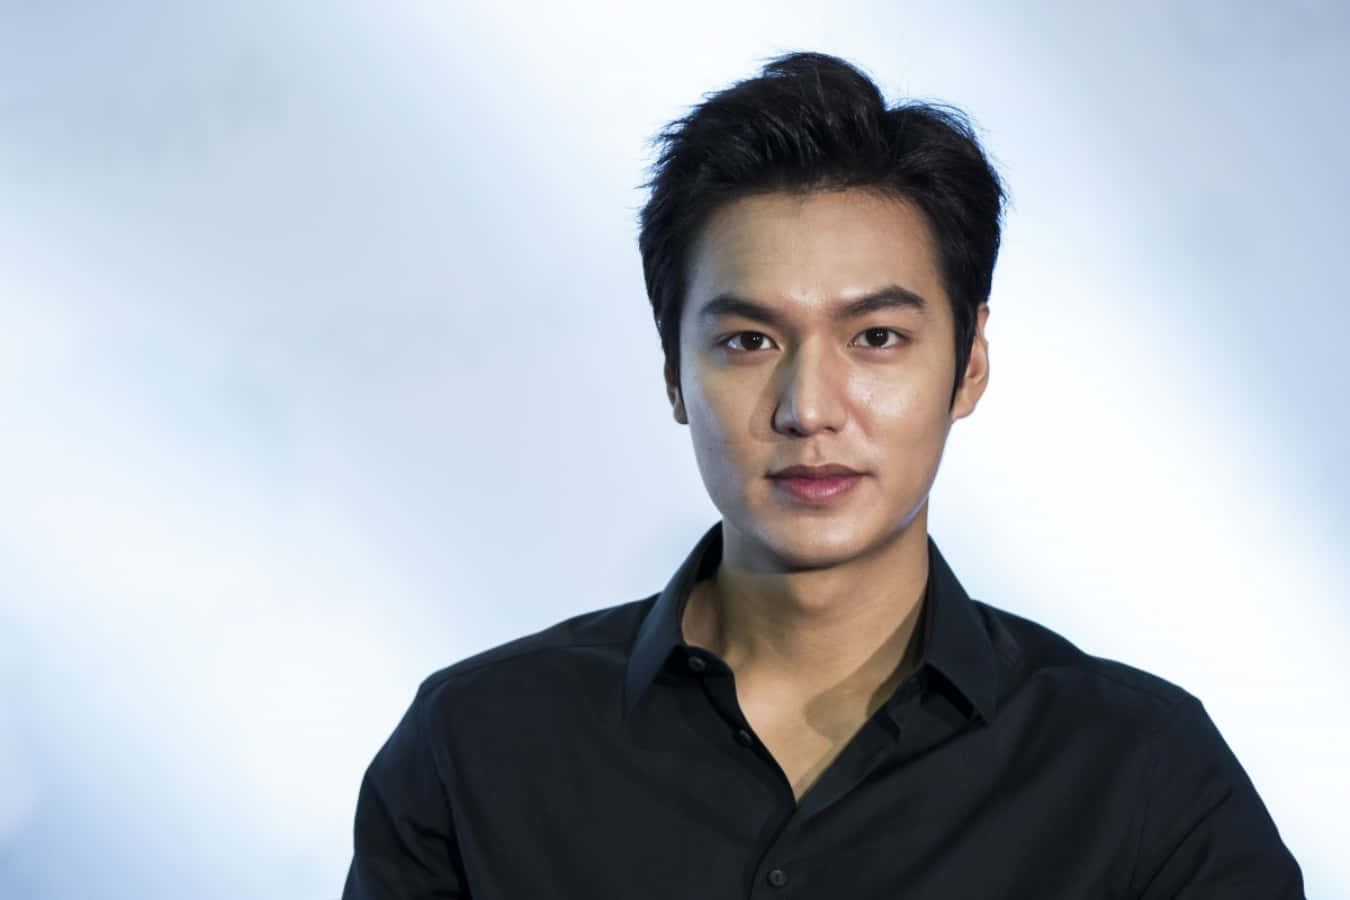 Lee Min Ho strikes a cool and confident pose"